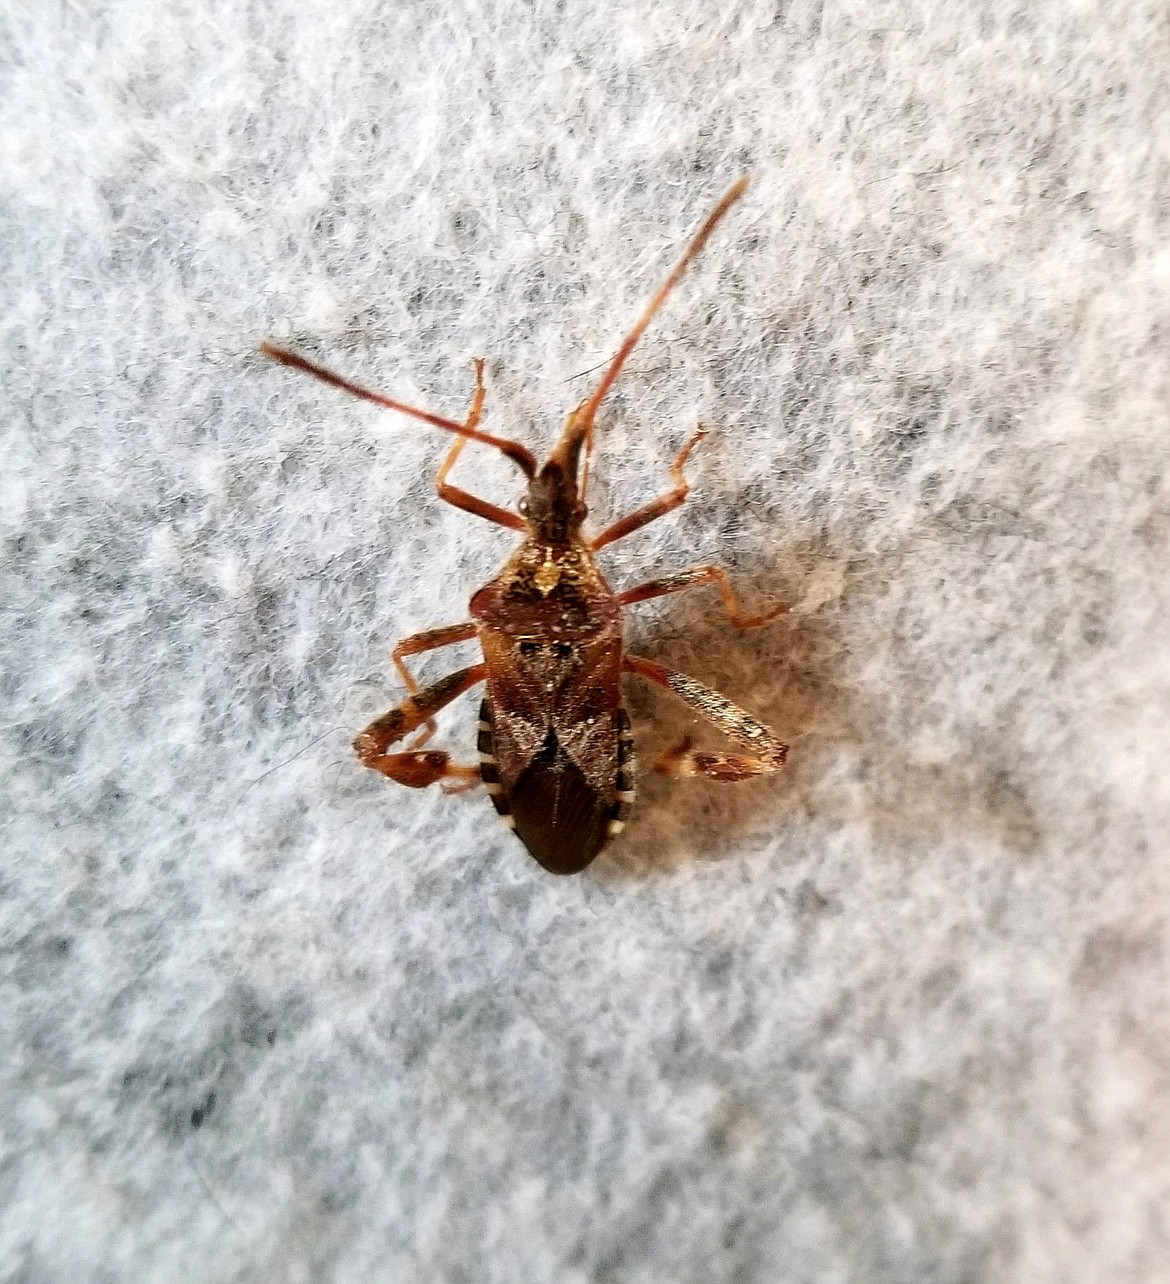 Leptoglossus occidentalis, or Western conifer seed bugs, are finding their way into North Idaho homes. Don't worry — unless you're a conifer seed, they're harmless. Just stinky.